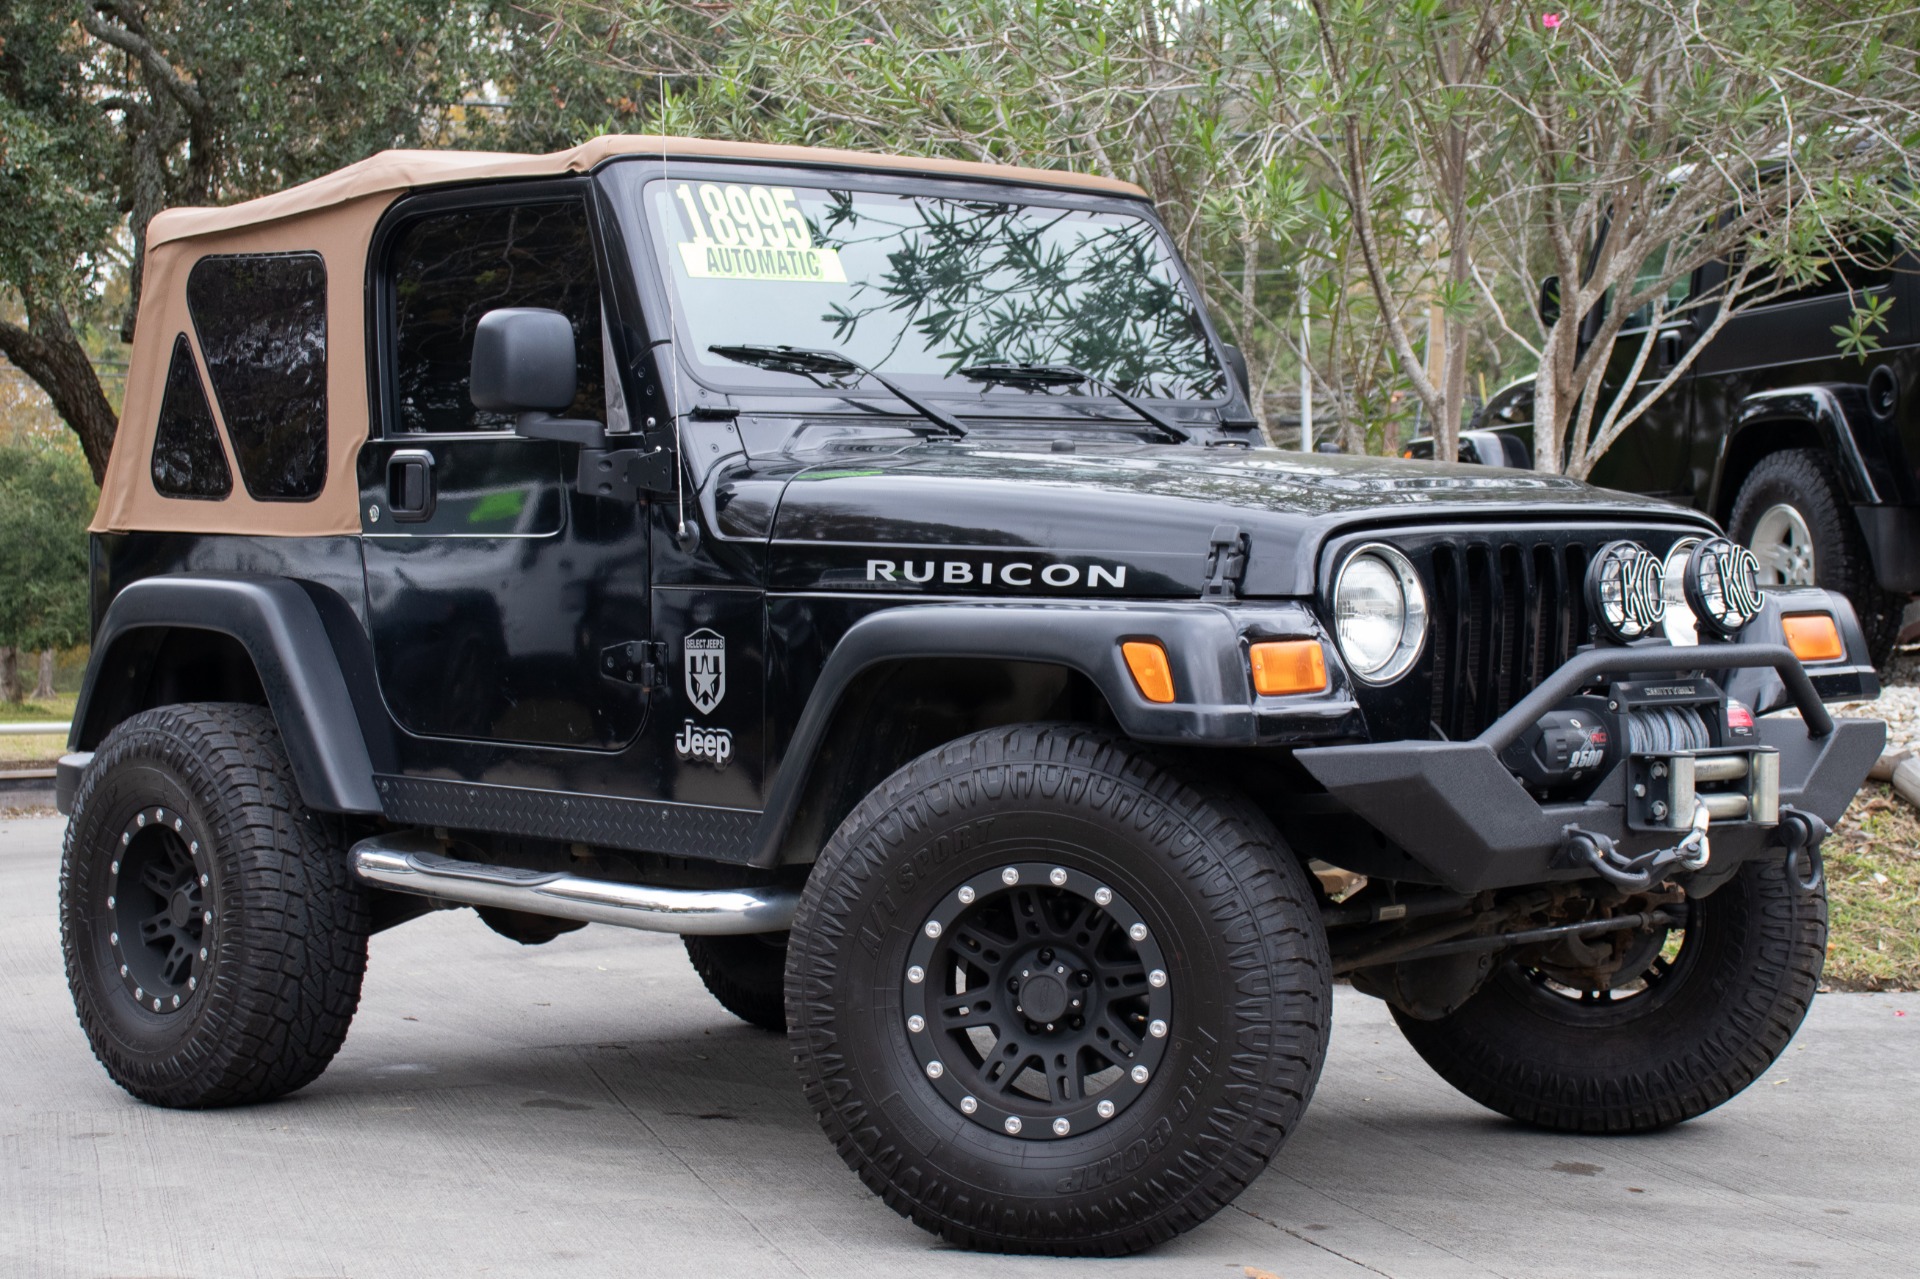 Used 2006 Jeep Wrangler Rubicon For Sale ($18,995) | Select Jeeps Inc.  Stock #766009